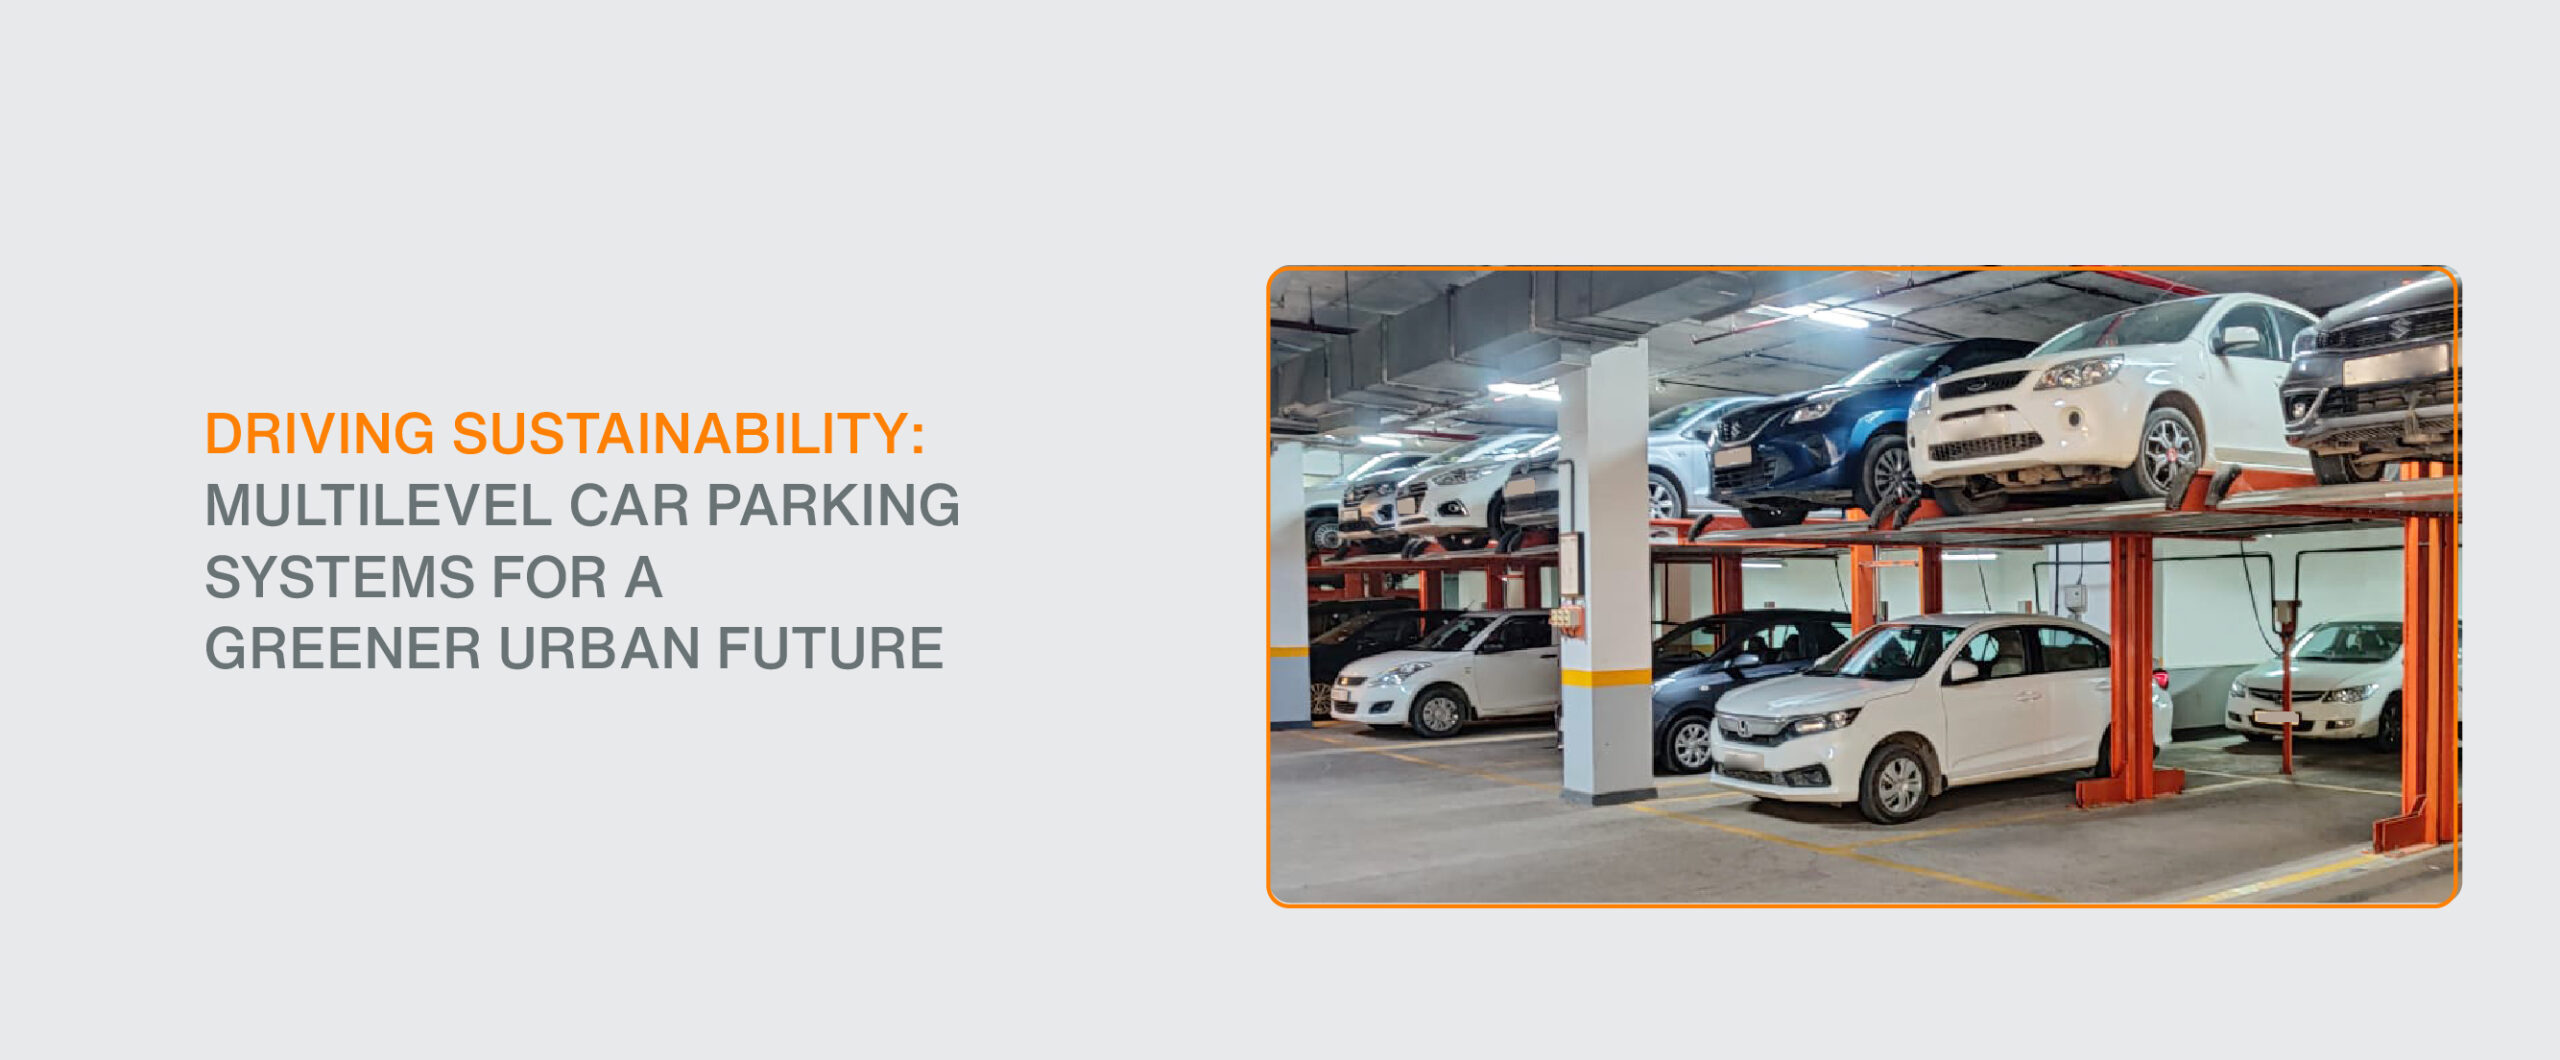 Driving Sustainability: Multilevel Car Parking Systems for a Greener Urban Future